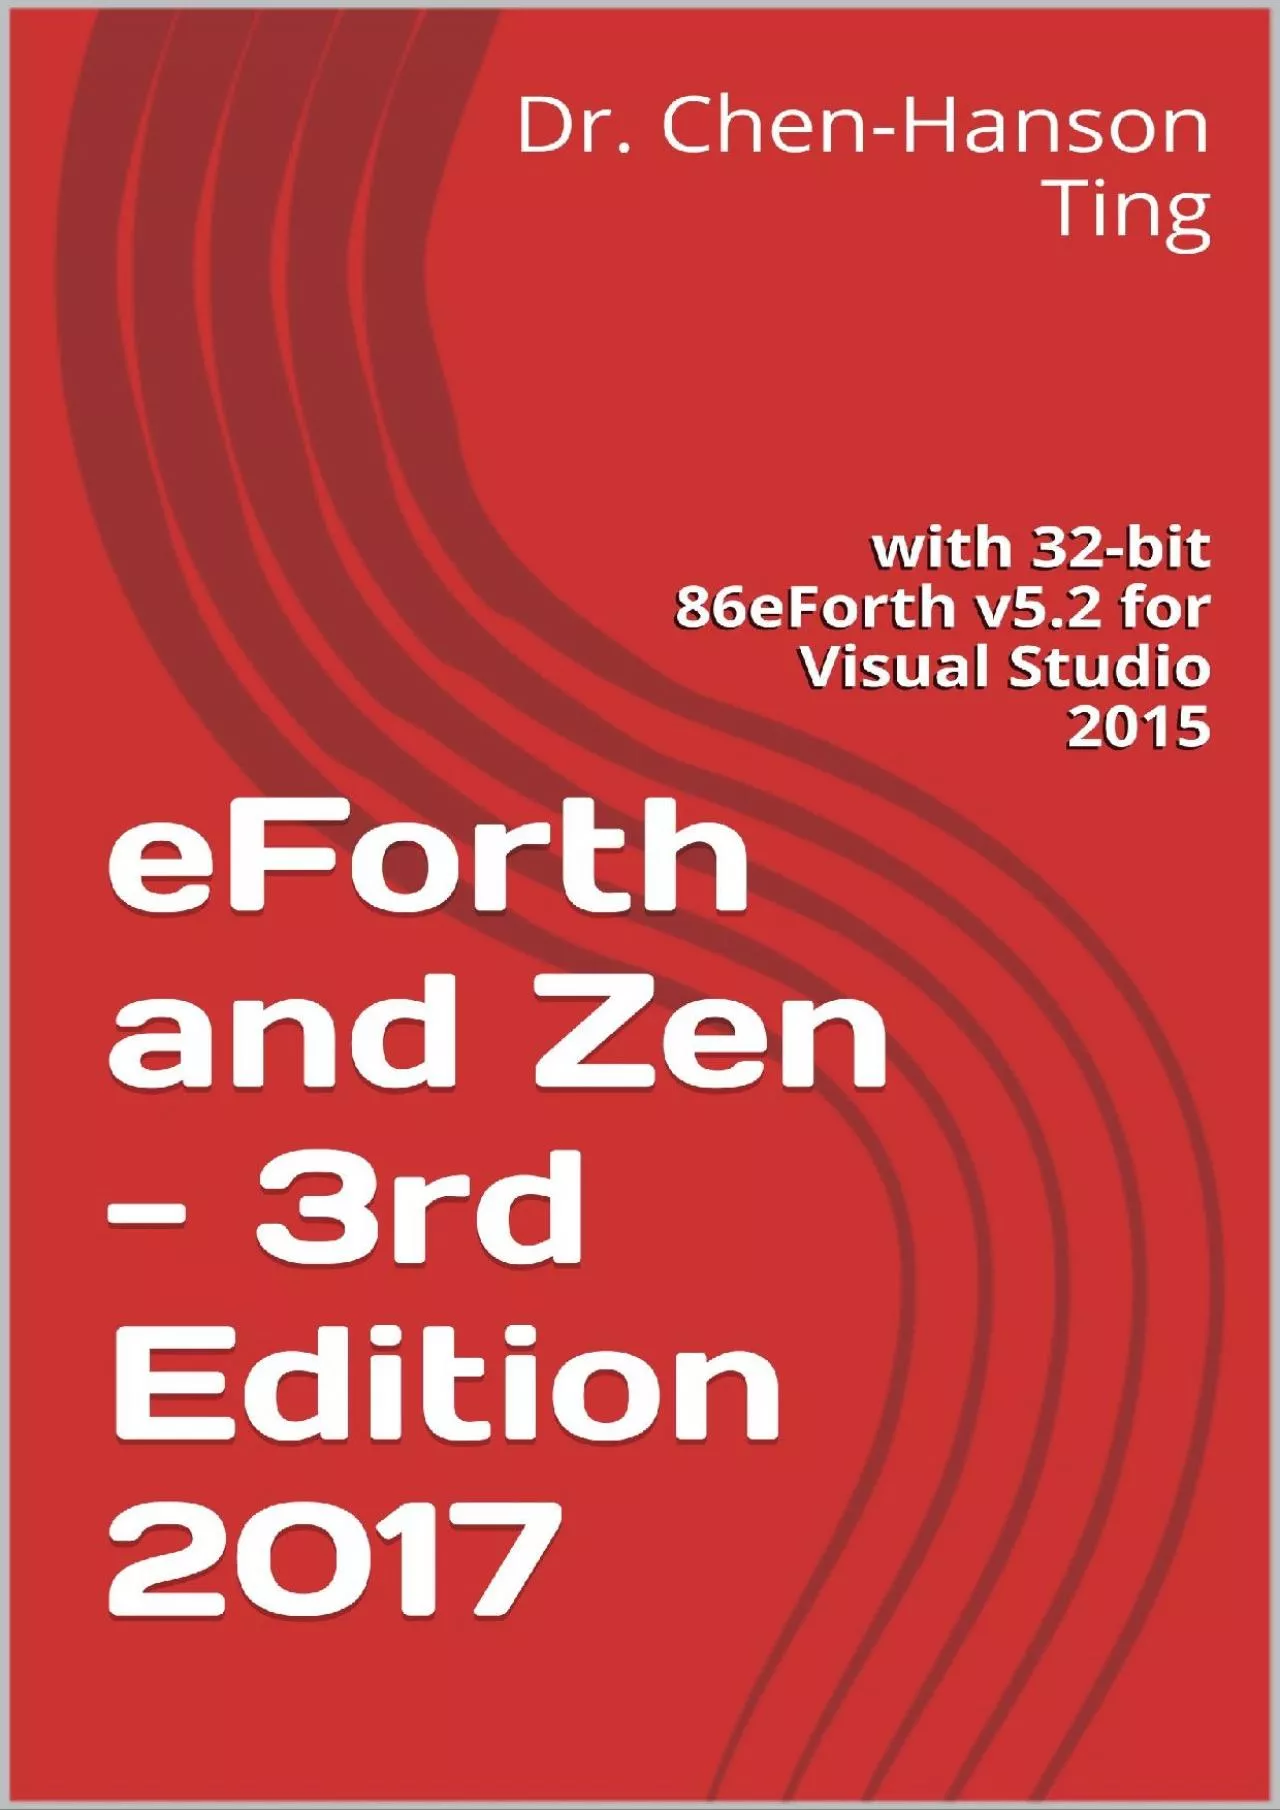 [eBOOK]-eForth and Zen - 3rd Edition 2017: with 32-bit 86eForth v5.2 for Visual Studio